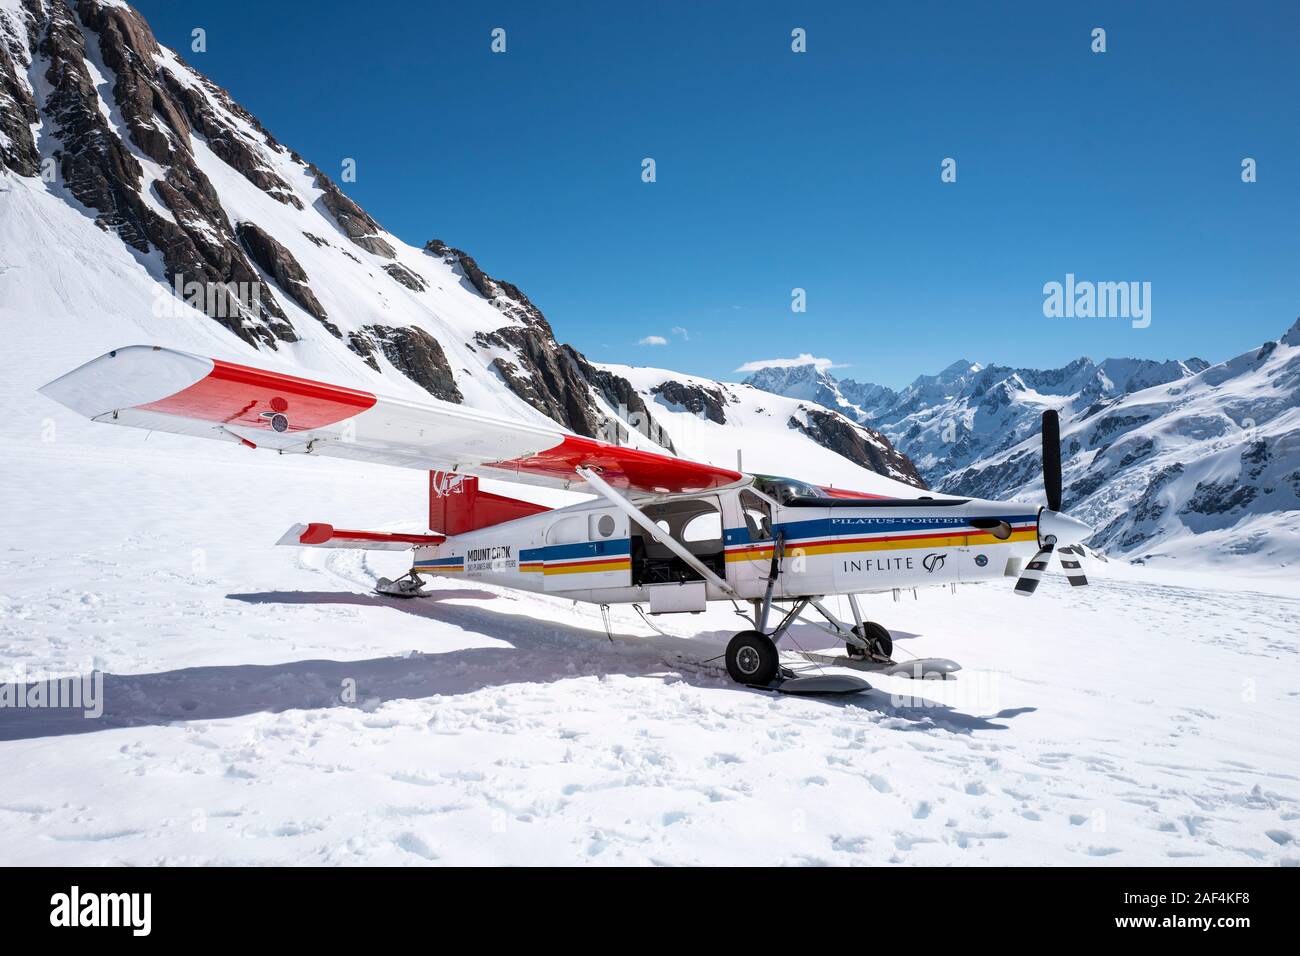 Helicopter and aeroplane flights over Mount Cook National Park glacier and glacial surroundings in Aoraki, South Island, New Zealand, Aotearoa Stock Photo